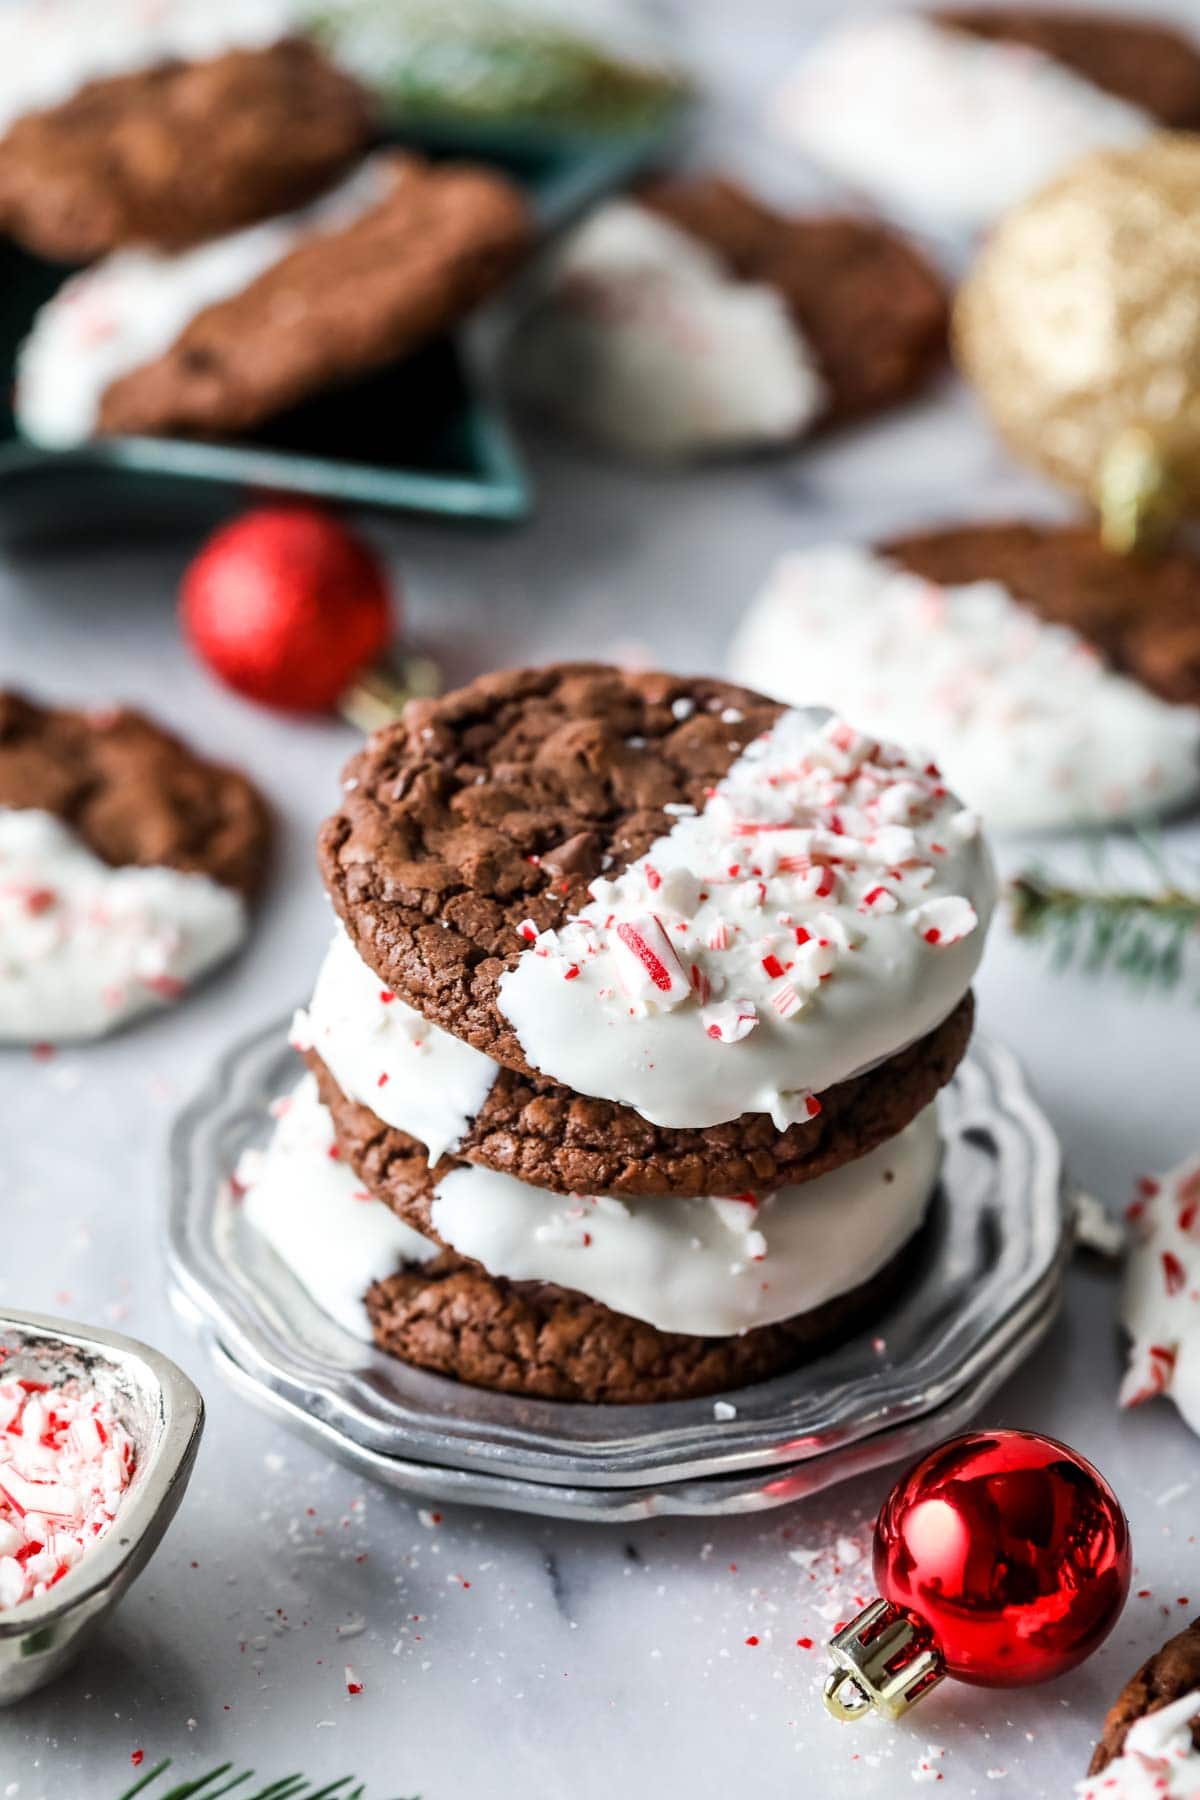 Stack of chocolate cookies half dipped in white chocolate and sprinkled with candy canes.